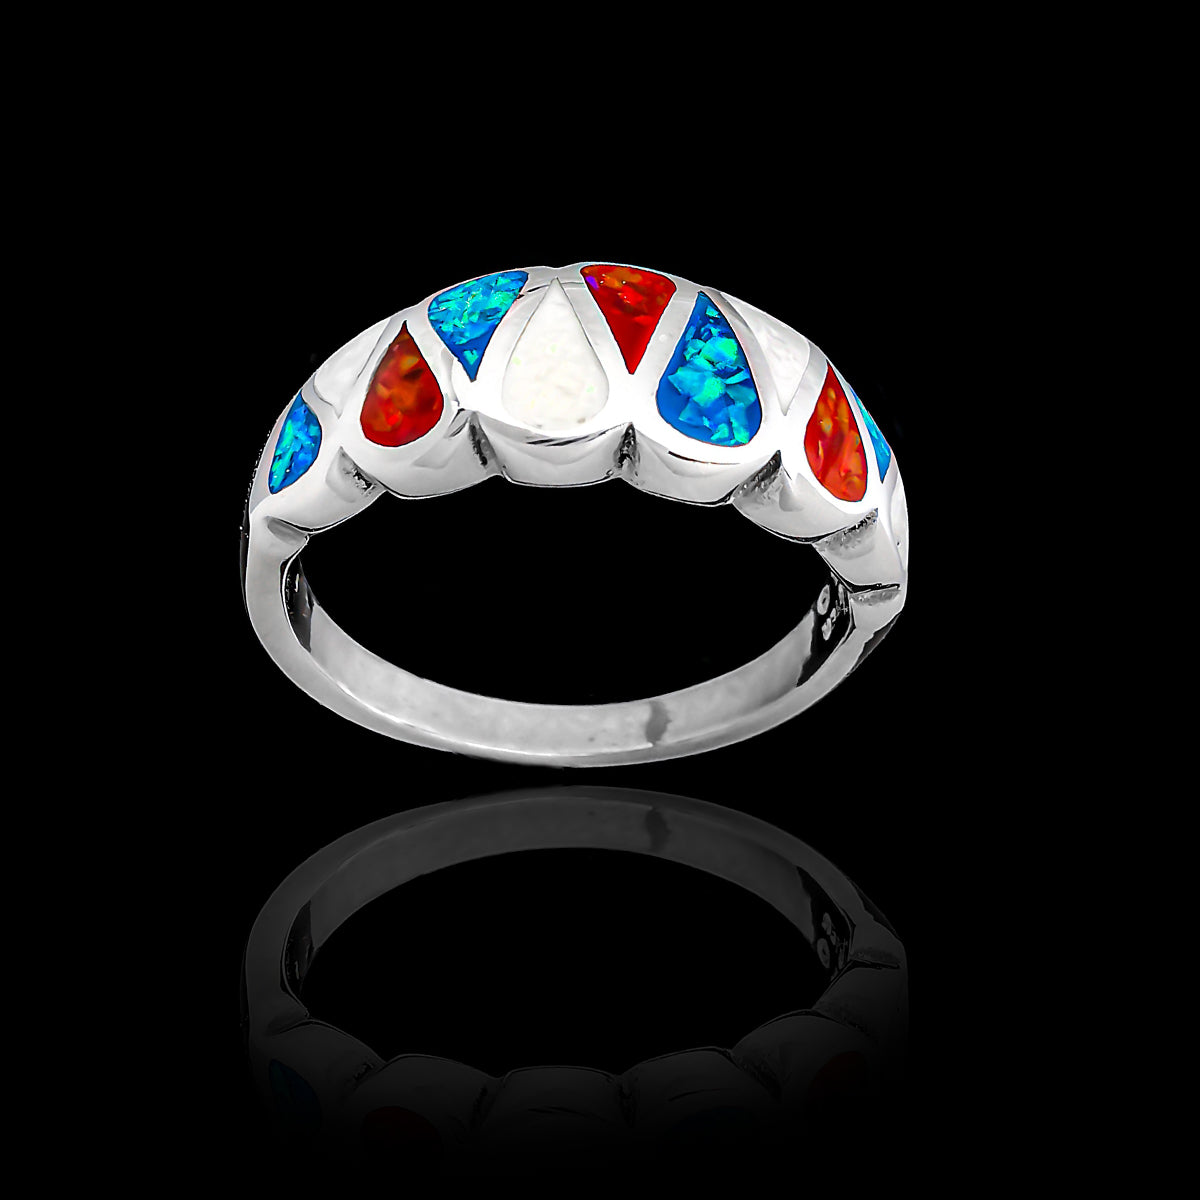 The Patriot Opal Teardrops Ring 925 Sterling Silver